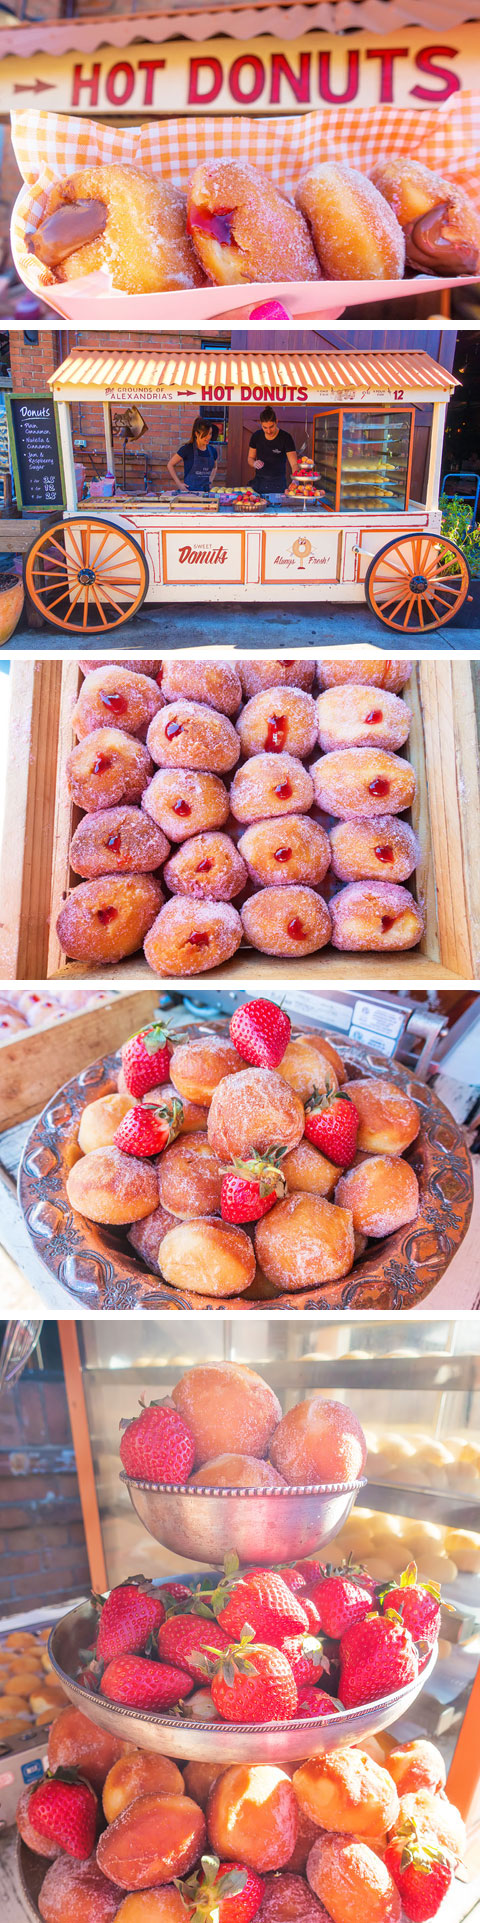 Fresh Hot Donuts at The Grounds of Alexandria. Breakfast and Brunch Cafe in Sydney, Australia. Don't miss the farmer's market on the weekends!